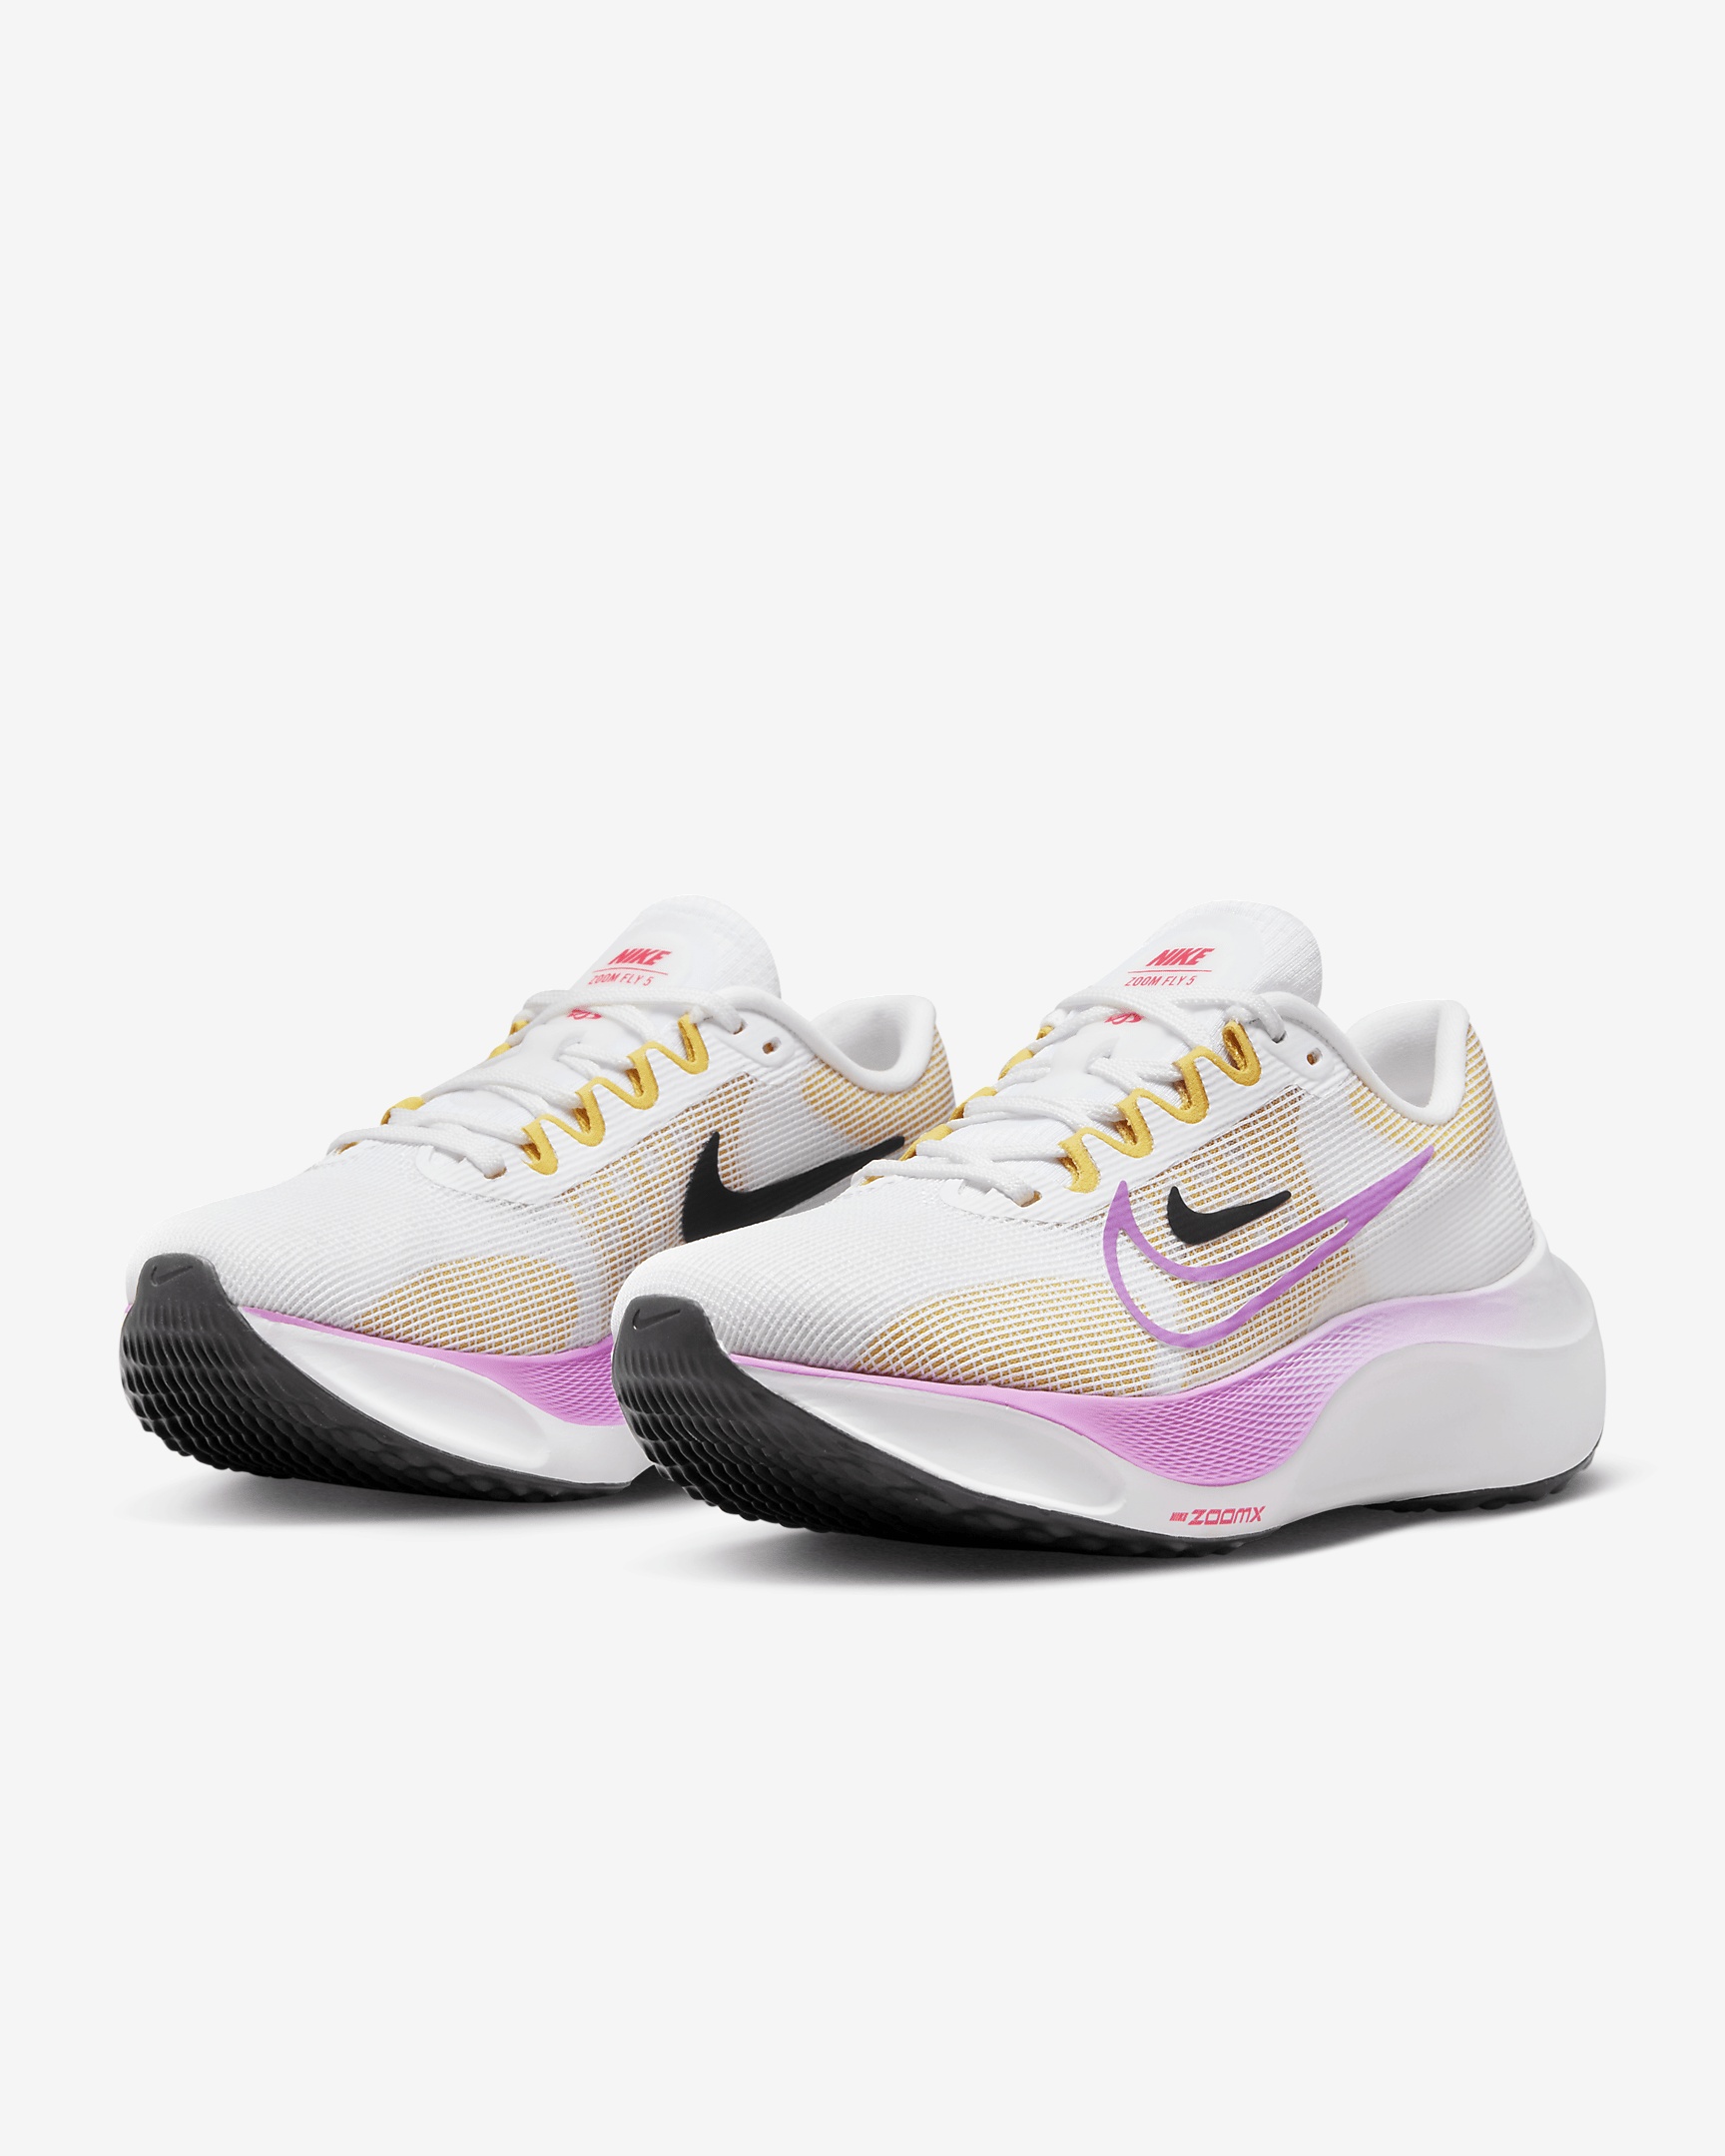 Nike Women's Zoom Fly 5 Road Running Shoes - 5